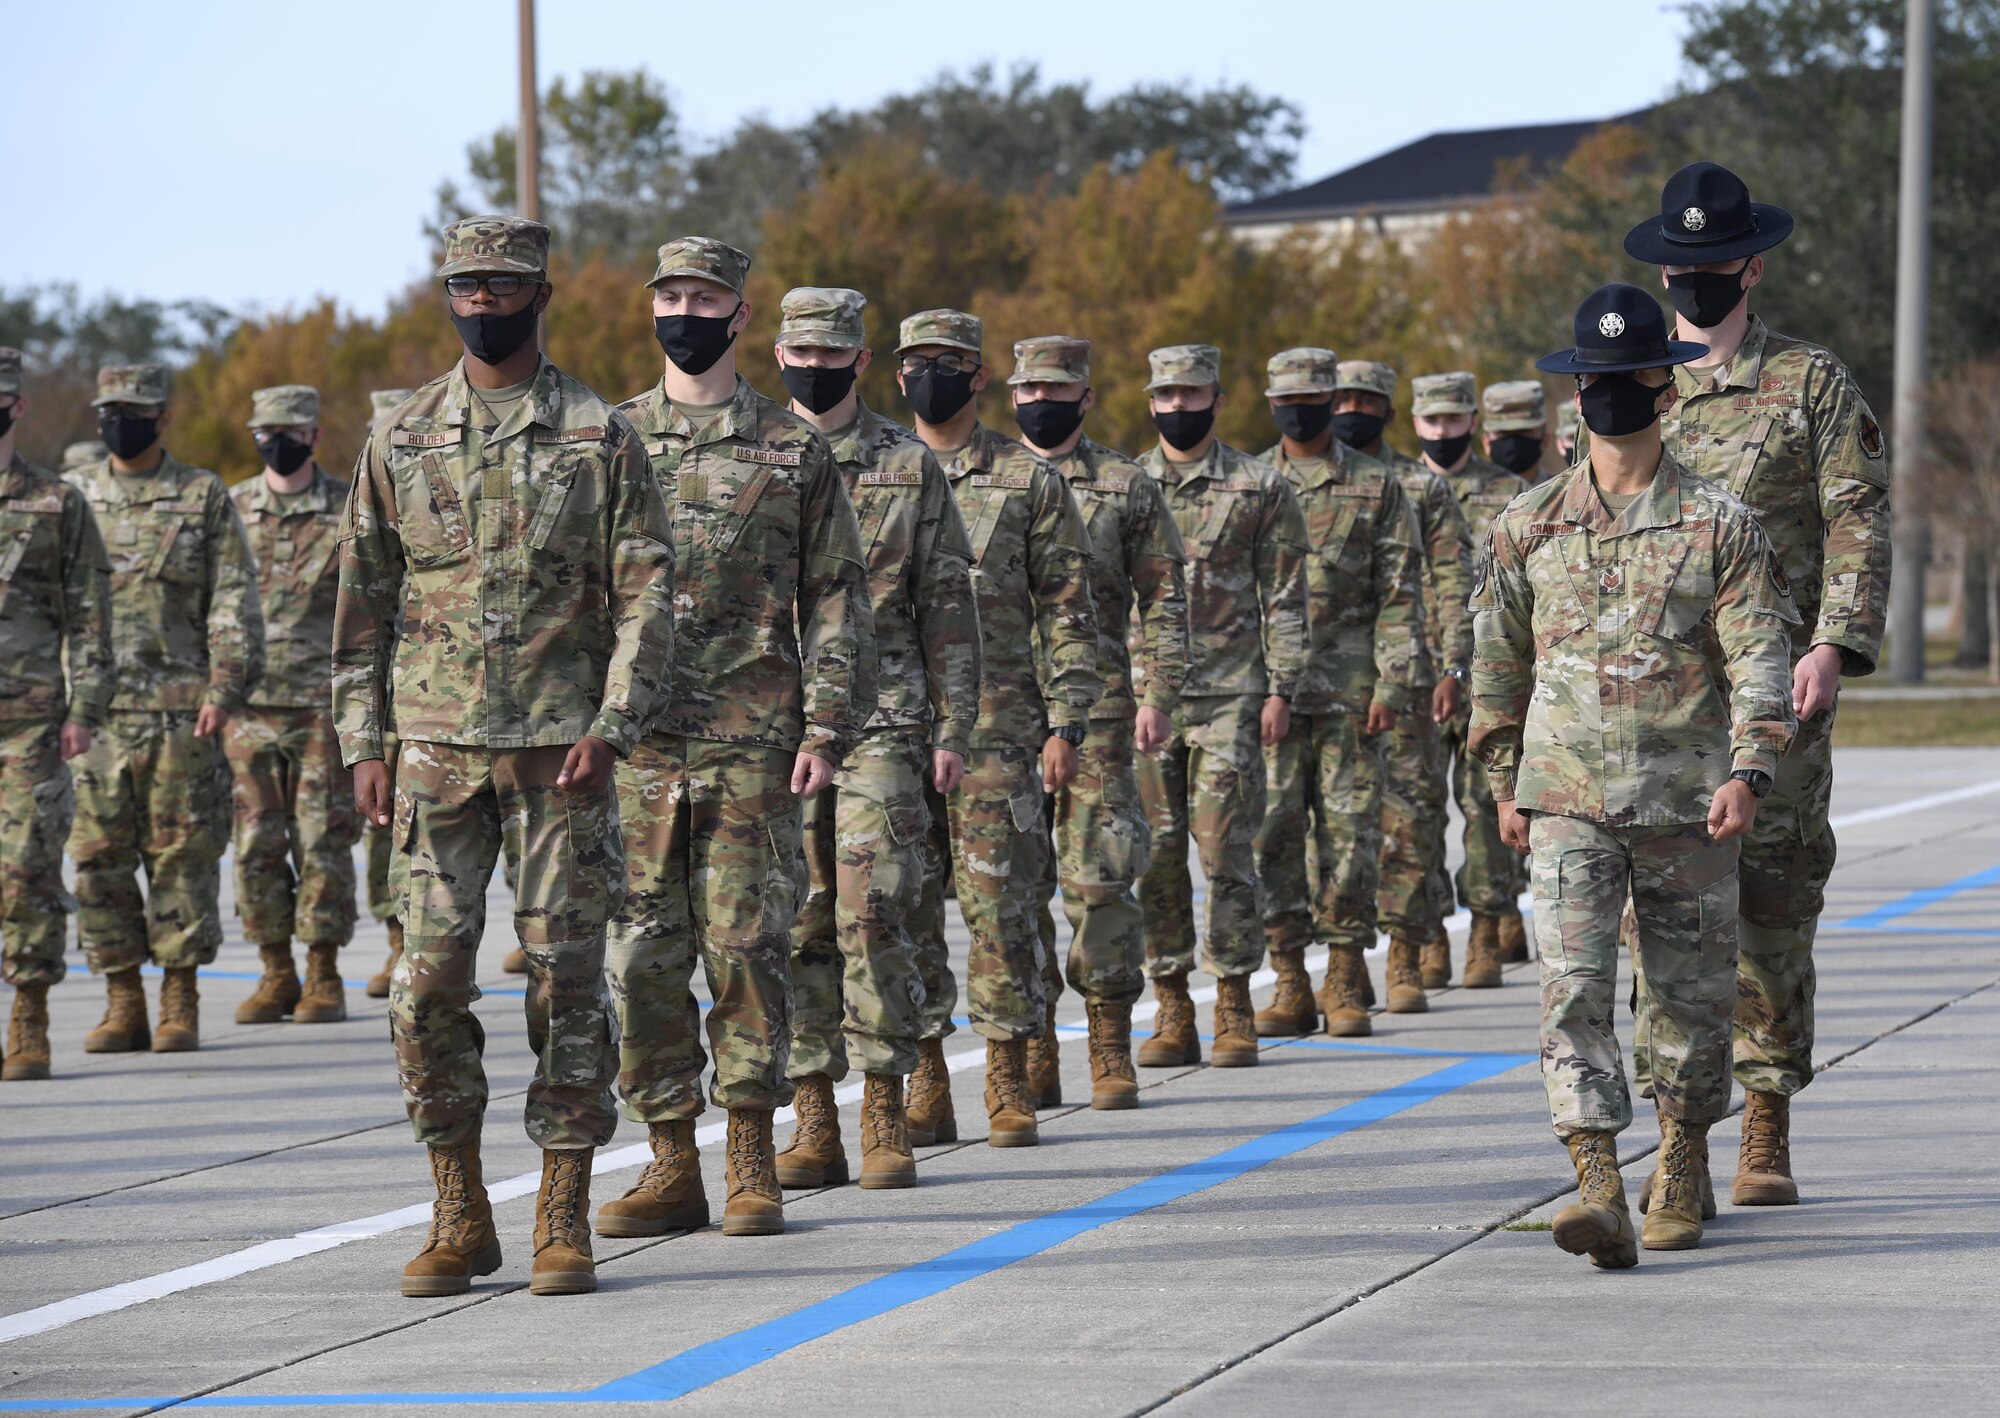 Military training instructors lead graduating basic military training trainees off the Levitow Training Support Facility drill pad during the final BMT graduation ceremony at Keesler Air Force Base, Mississippi, Nov. 6, 2020. Nearly 60 trainees from the 37th Training Wing Detachment 5 completed the six-week BMT course. Throughout the duration of BMT training at Keesler, 18 flights and 939 Airmen graduated. (U.S. Air Force photo by Kemberly Groue)